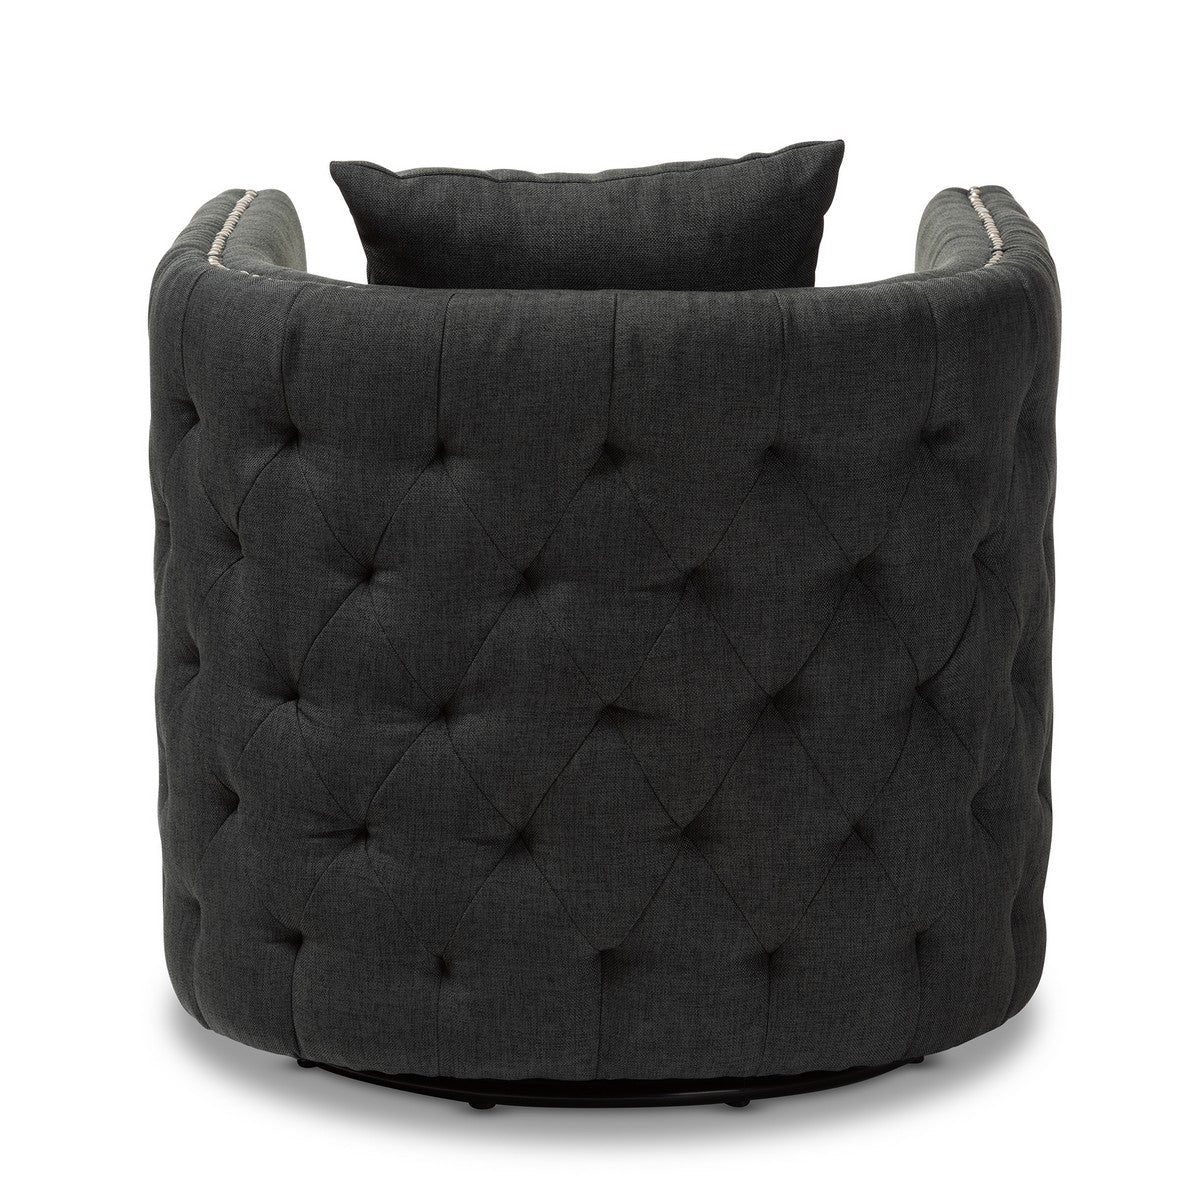 Baxton Studio Micah Modern and Contemporary Grey Fabric Upholstered Tufted Swivel Chair